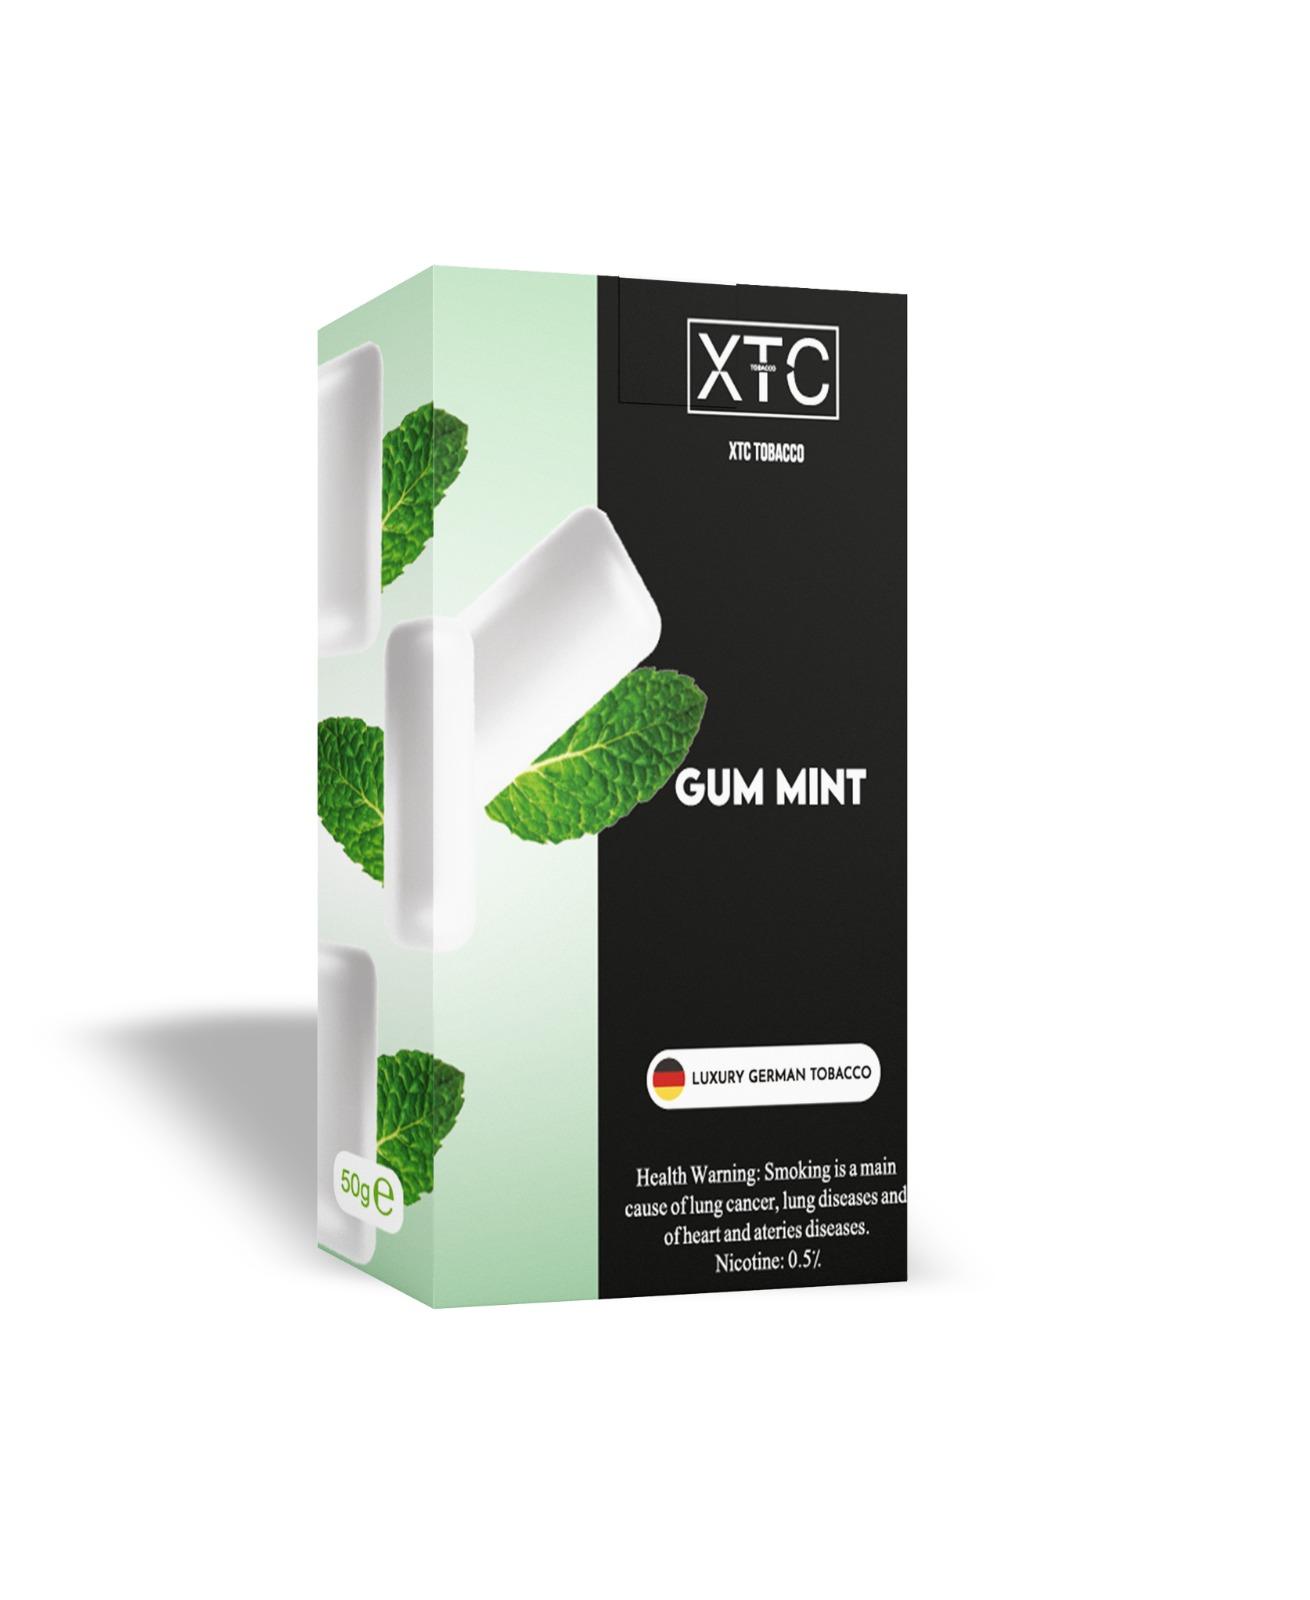 Image of XTC Tobacco product Gum Mint